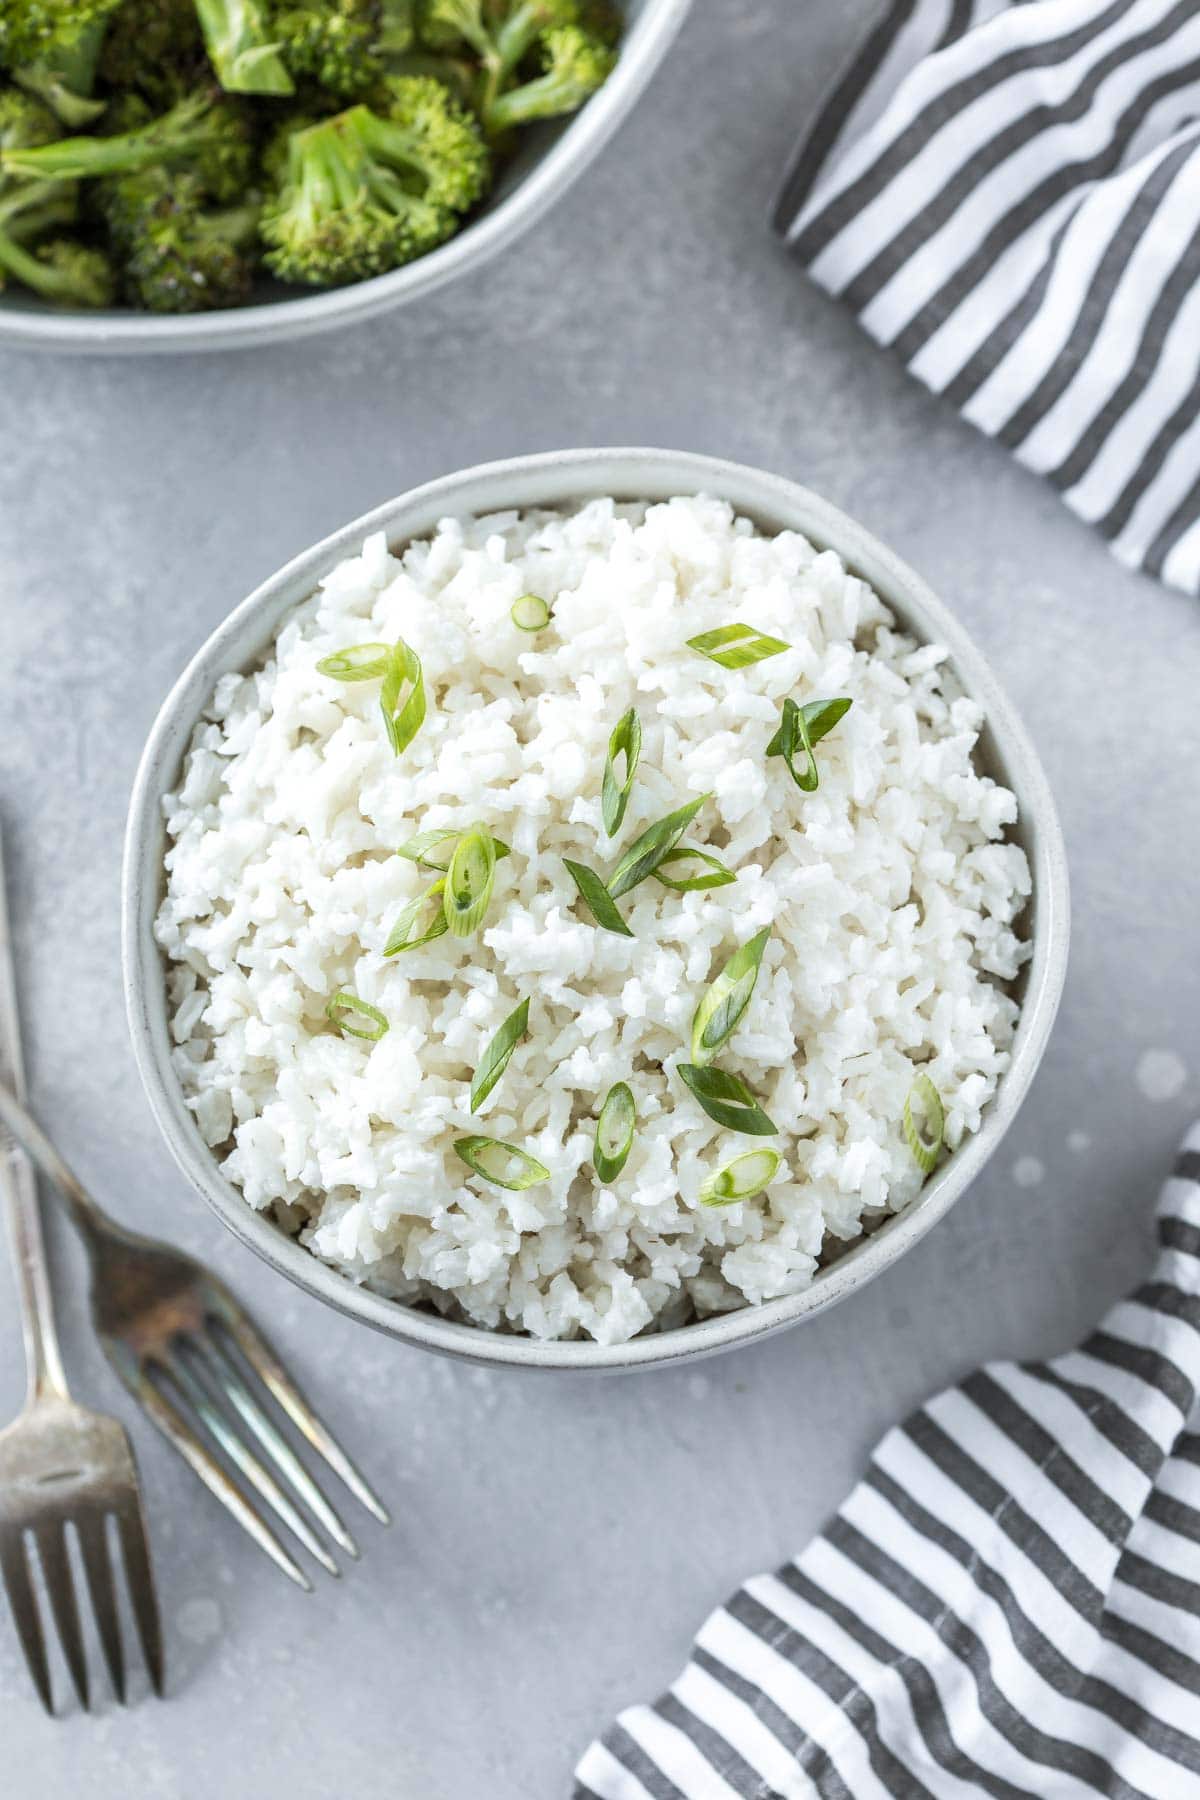 coconut rice recipe in a serving bowl topped with sliced green onions on a gray surface with forks, a striped napkin and a bowl of broccoli